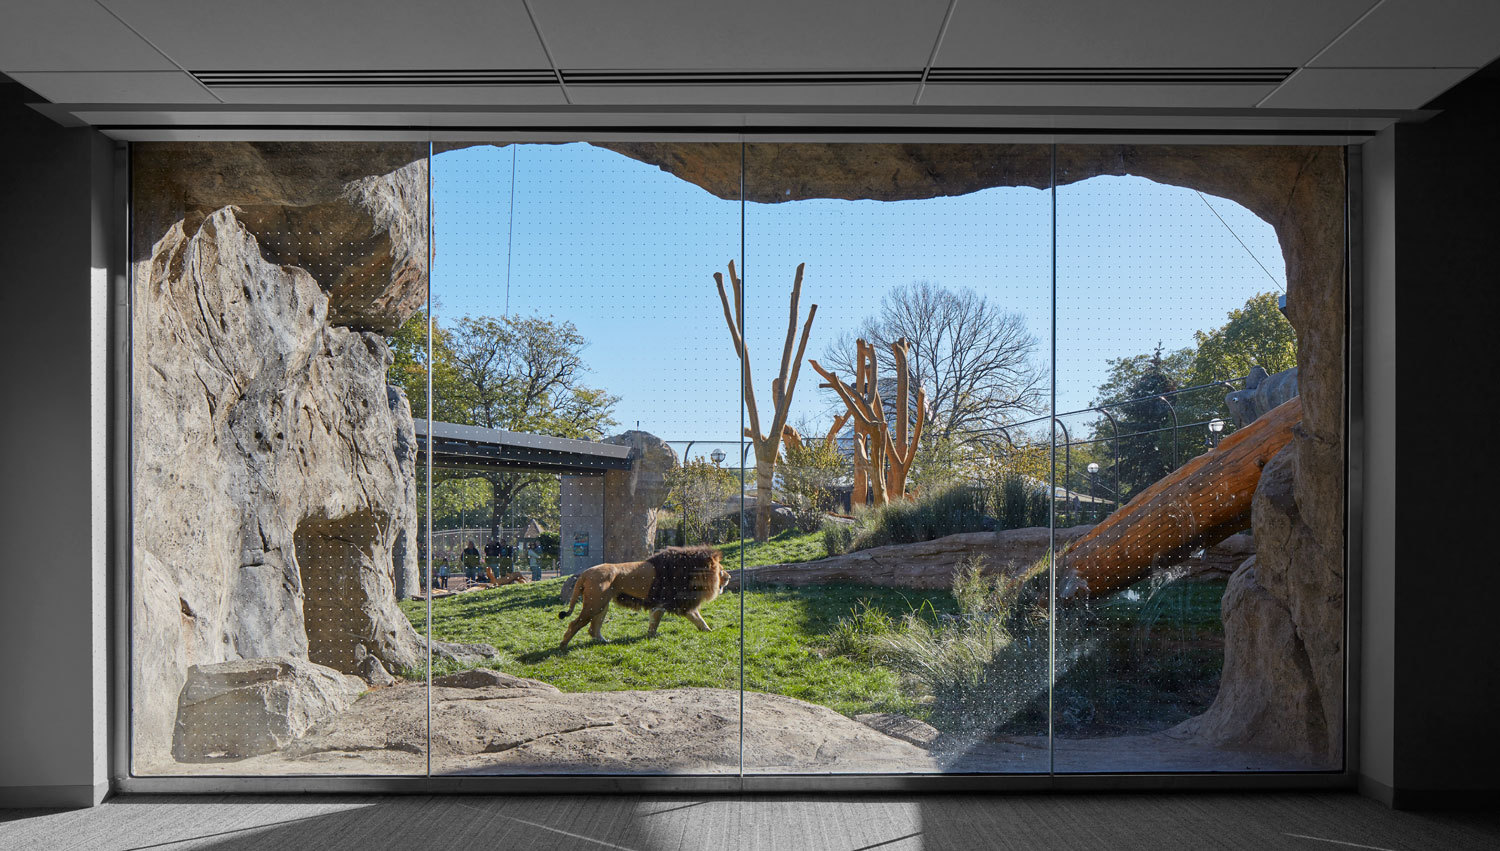 13_LPZ_Pepper_Family_Wildlife_Center_View_from_Conference_Room.jpg